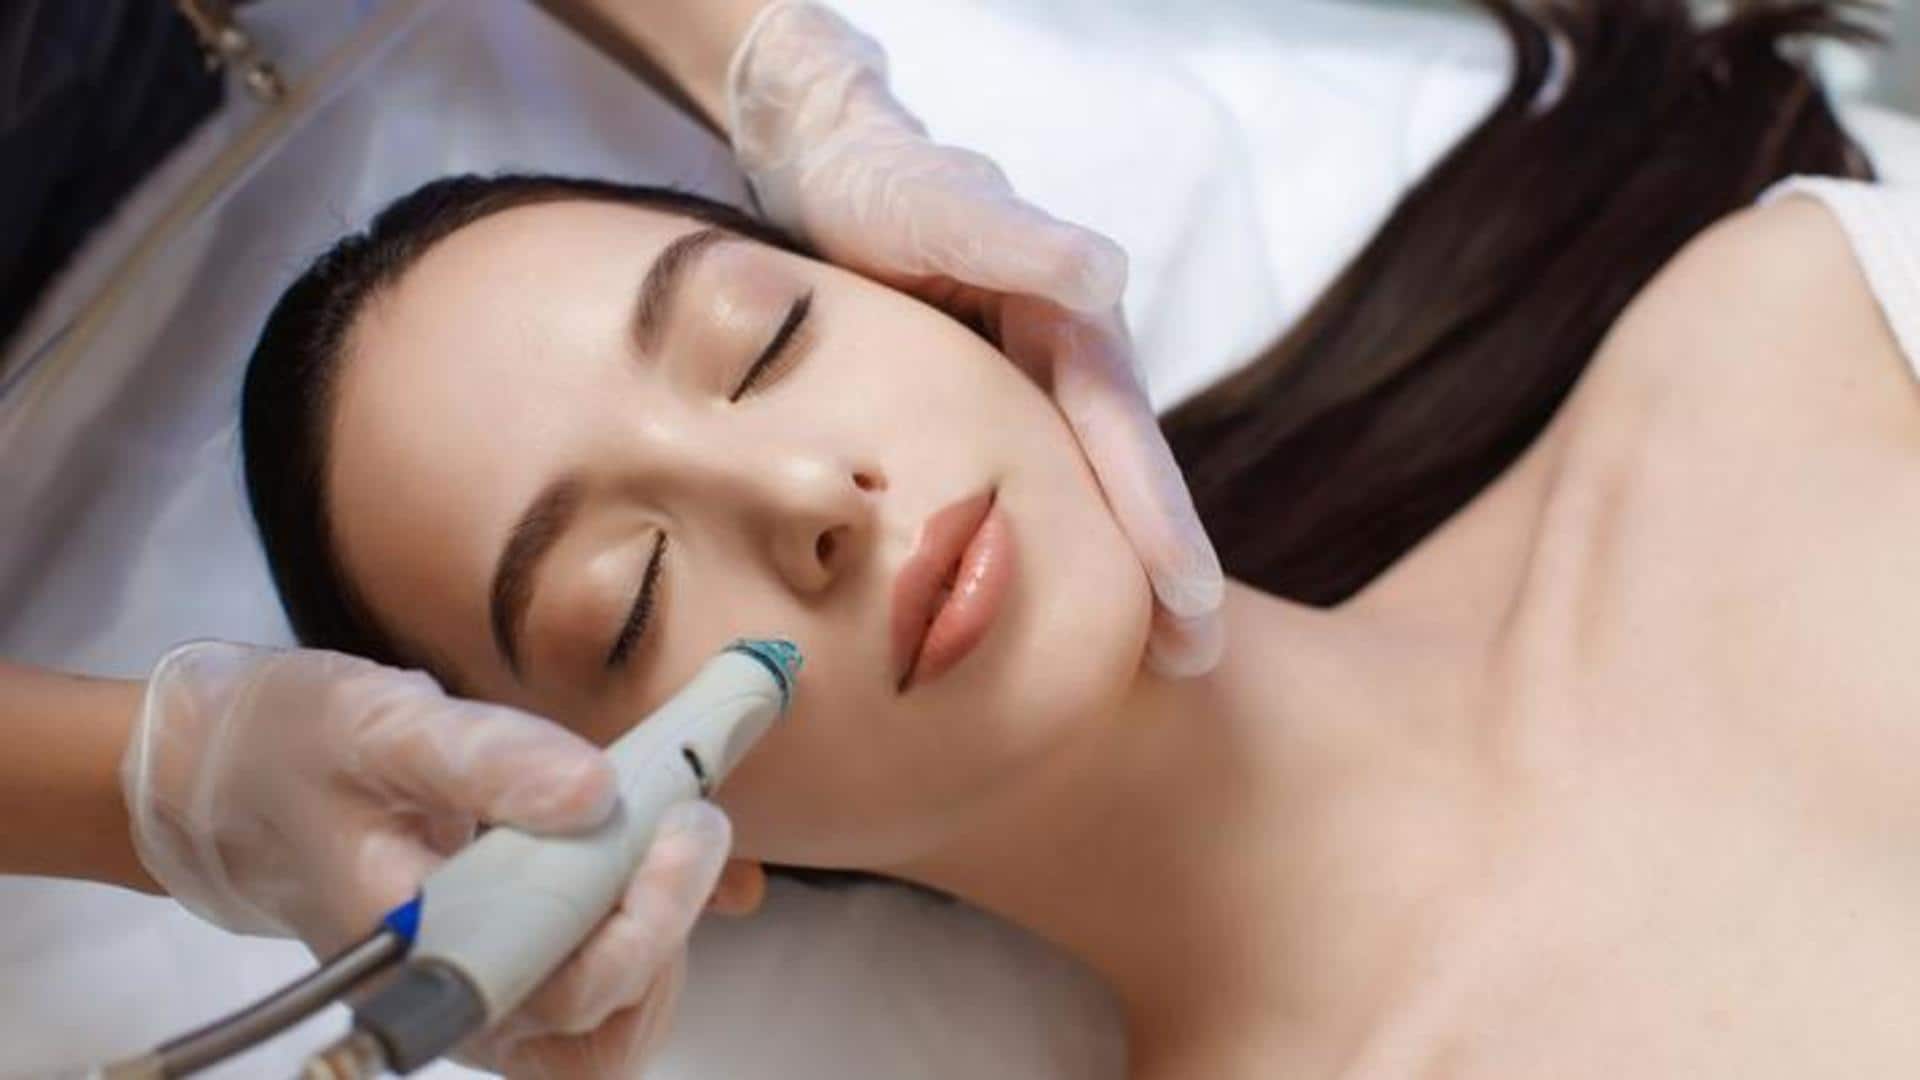 All about HydraFacials: Steps, benefits, risks and more